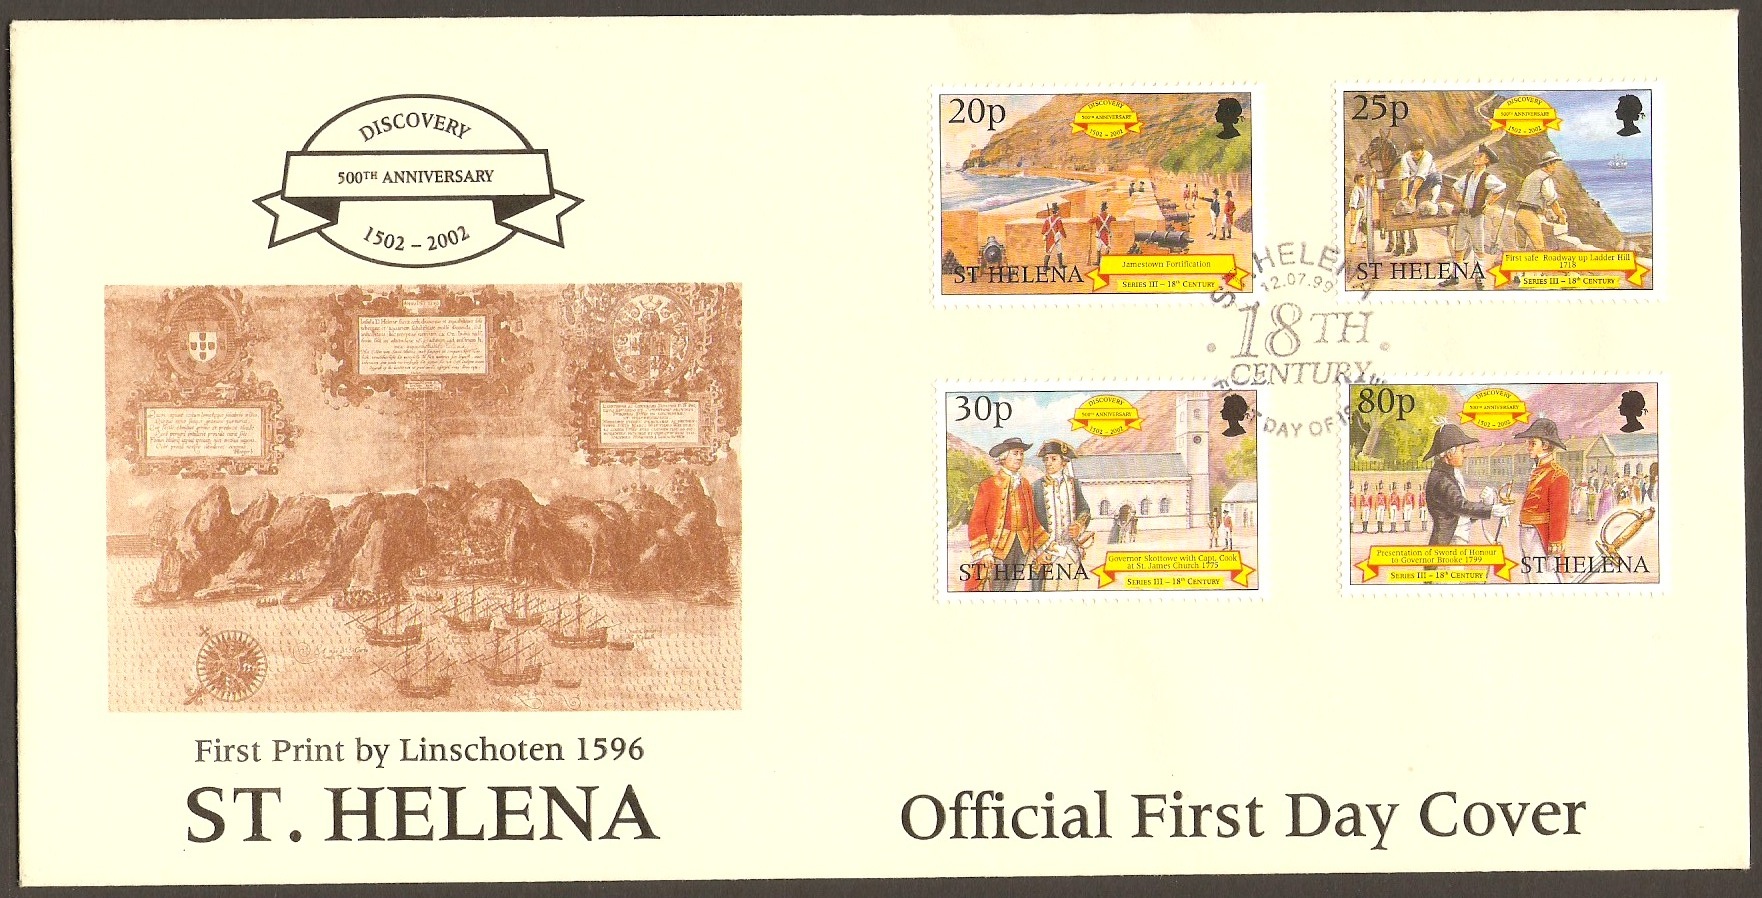 St Helena 1999 500th. Anniversary of Discovery FDC.